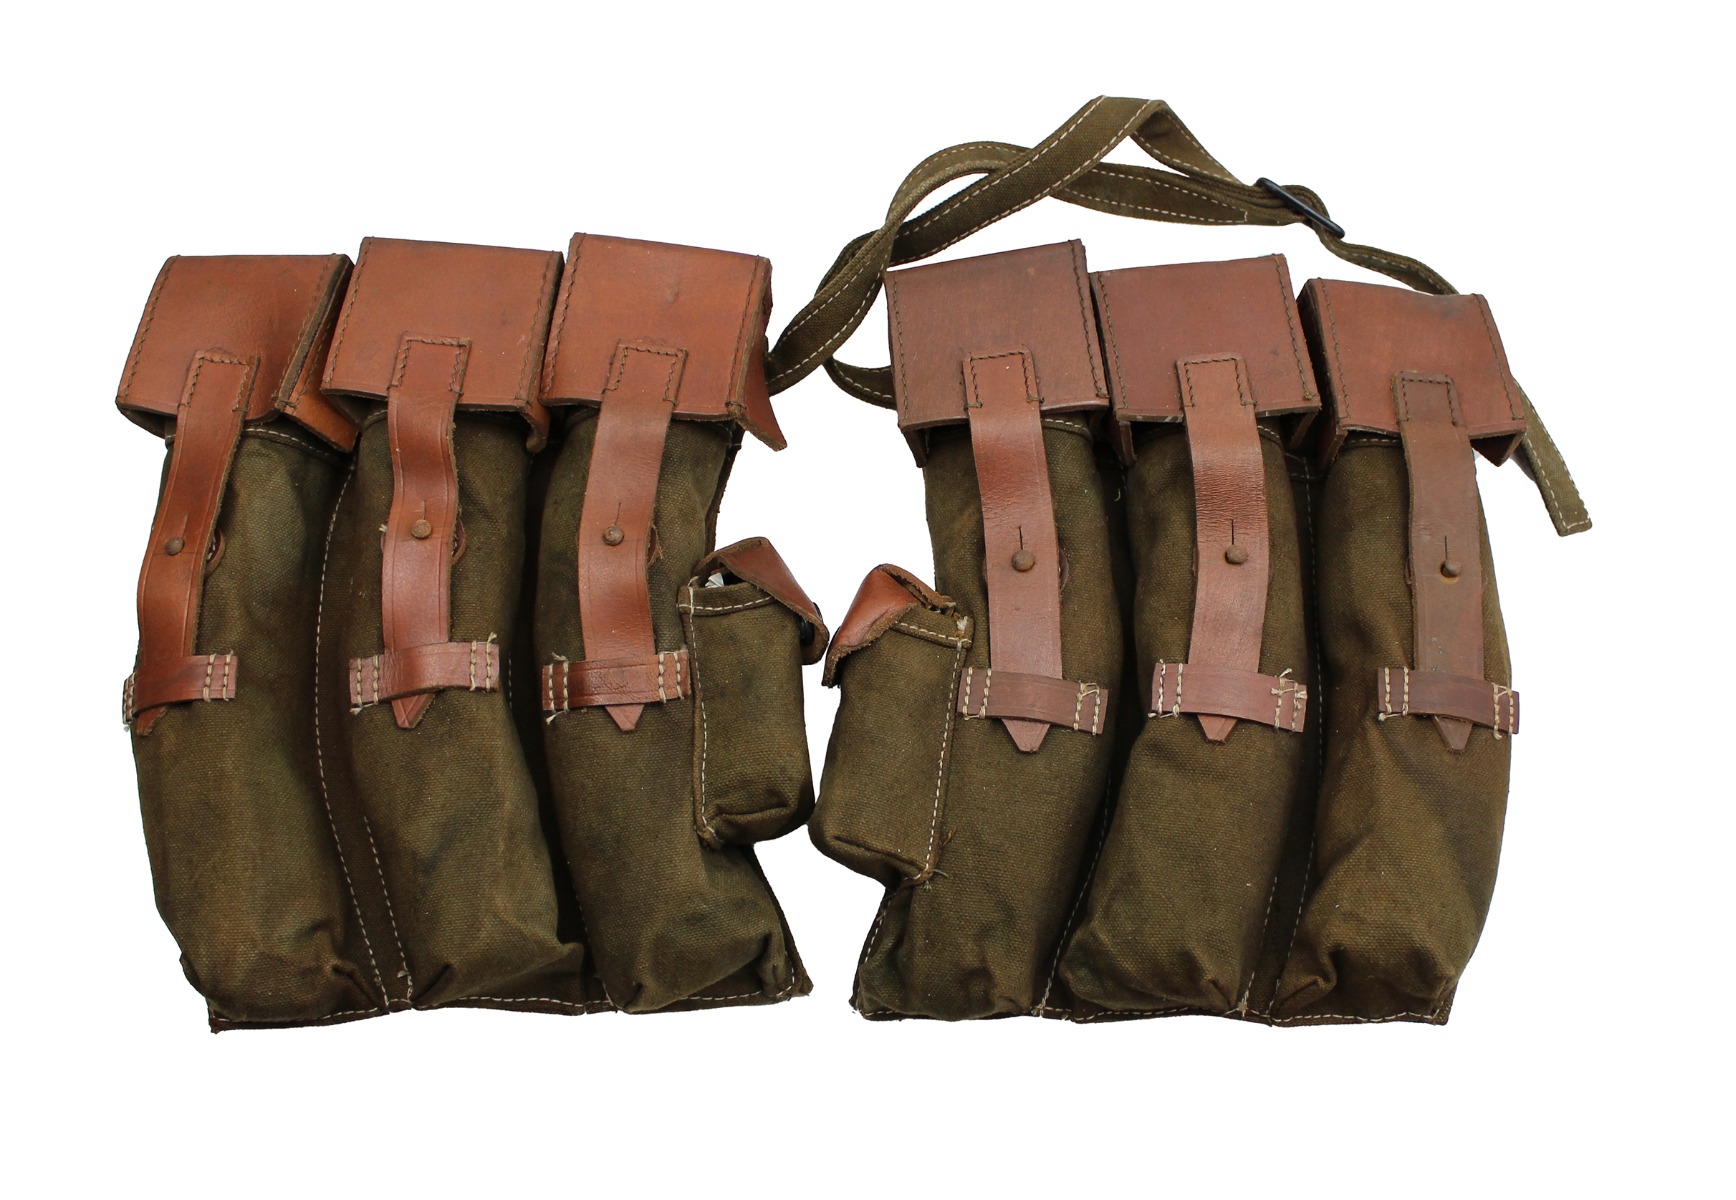 GERMAN WW2 AGED MP44 STG 44 MAGAZINE POUCH SET TAN AND GREEN